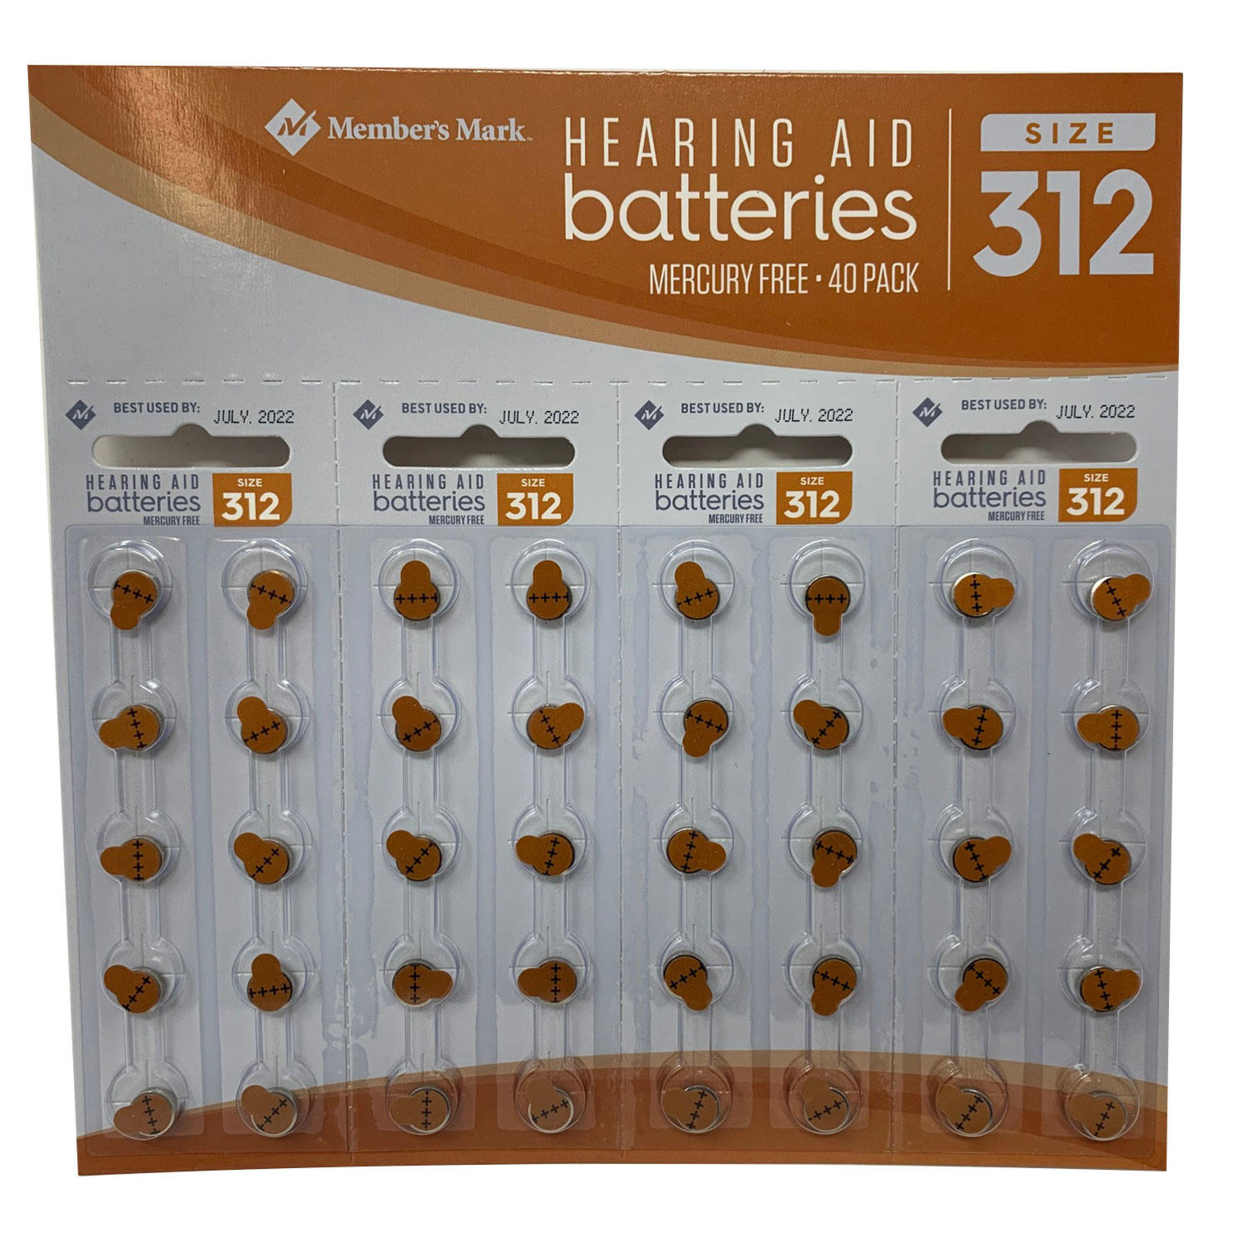 Members Mark Hearing Aid Batteries, Size 312 (40 Count)